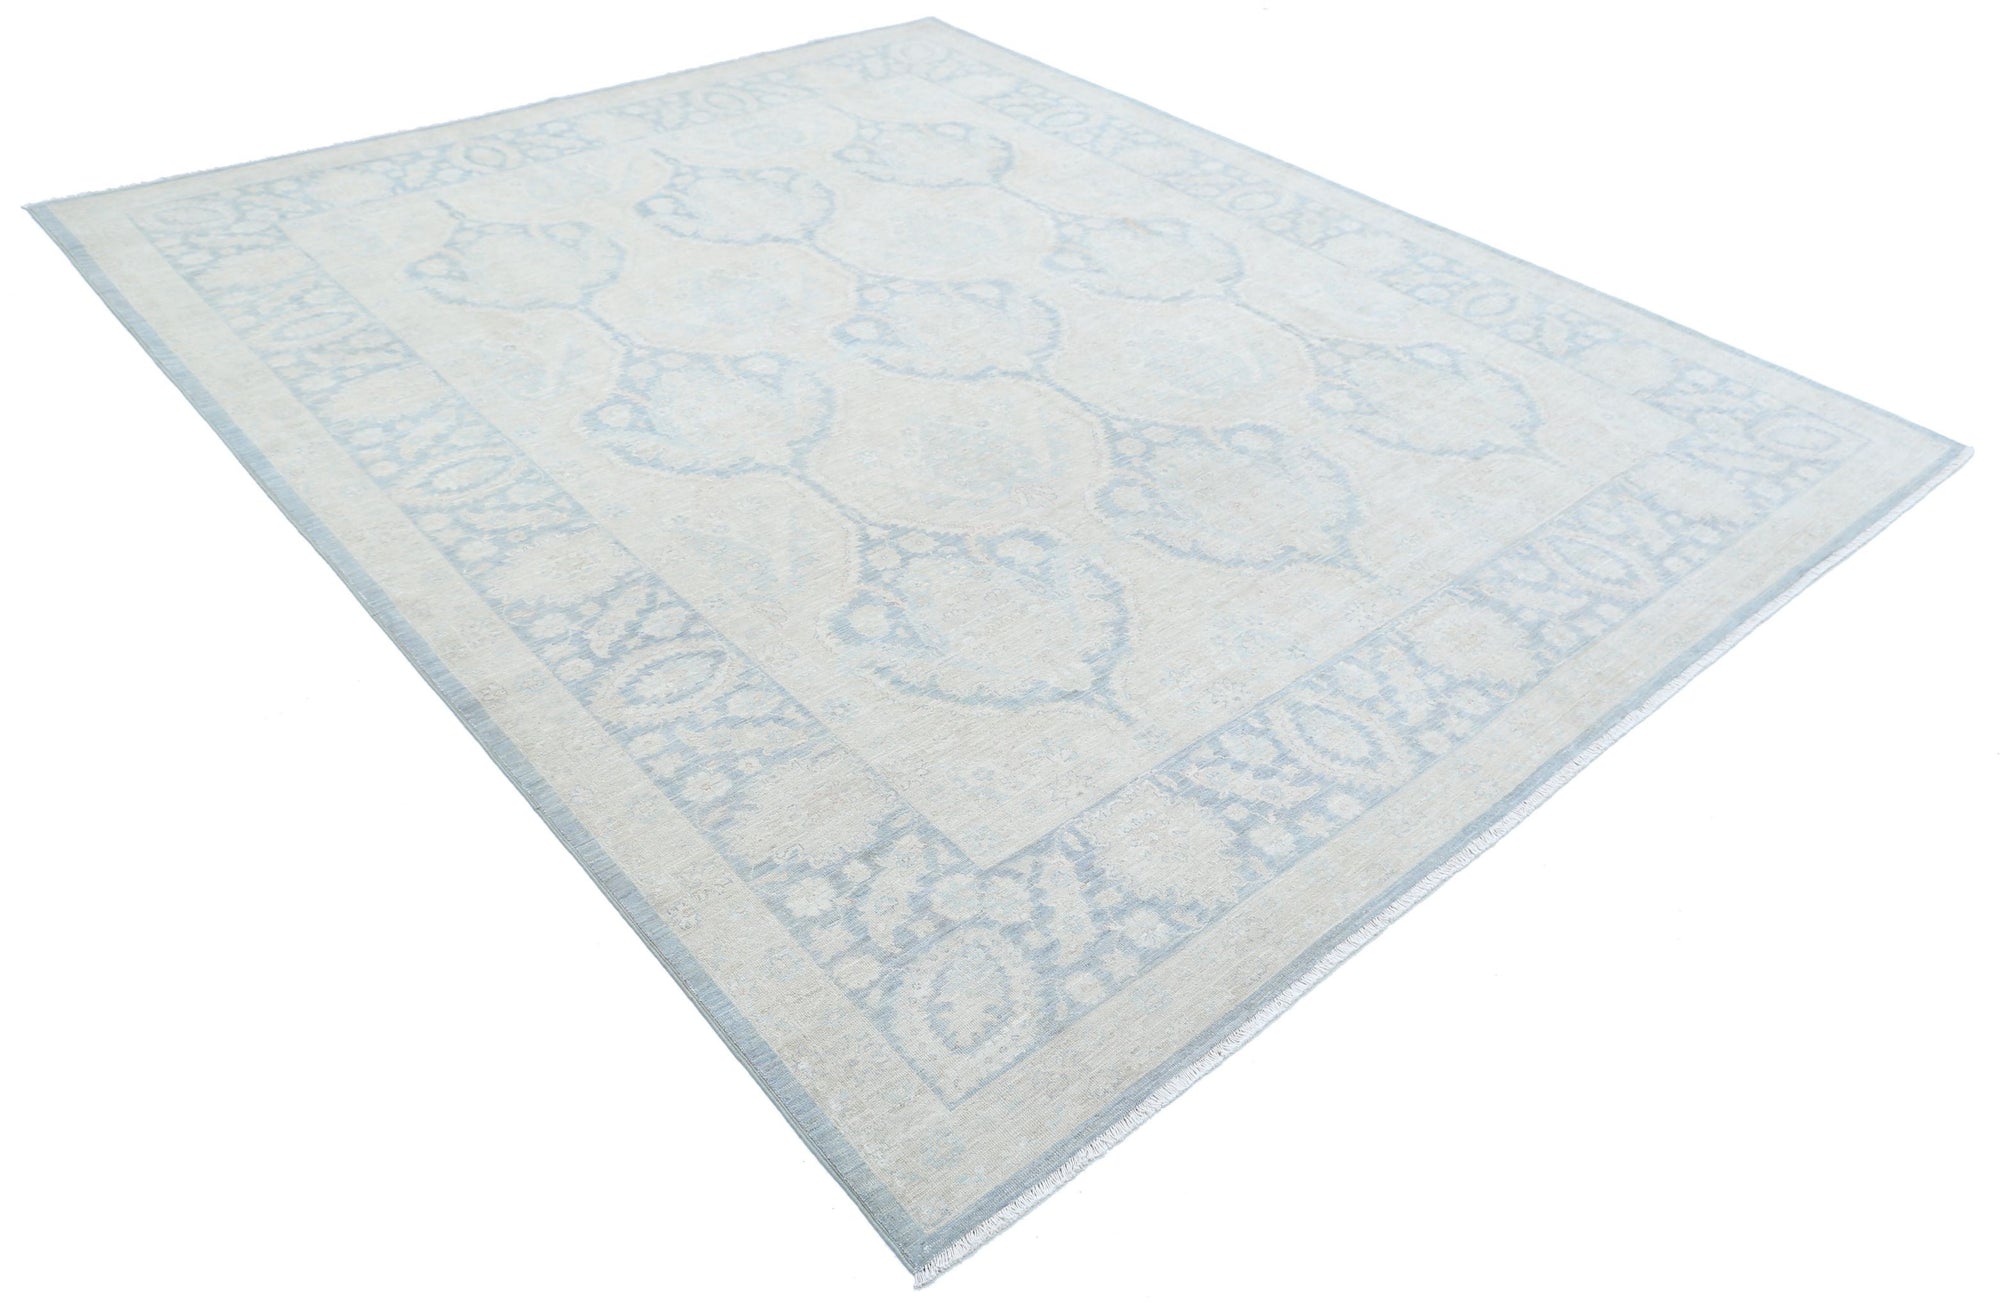 Serenity-hand-knotted-tabriz-wool-rug-5015183-1